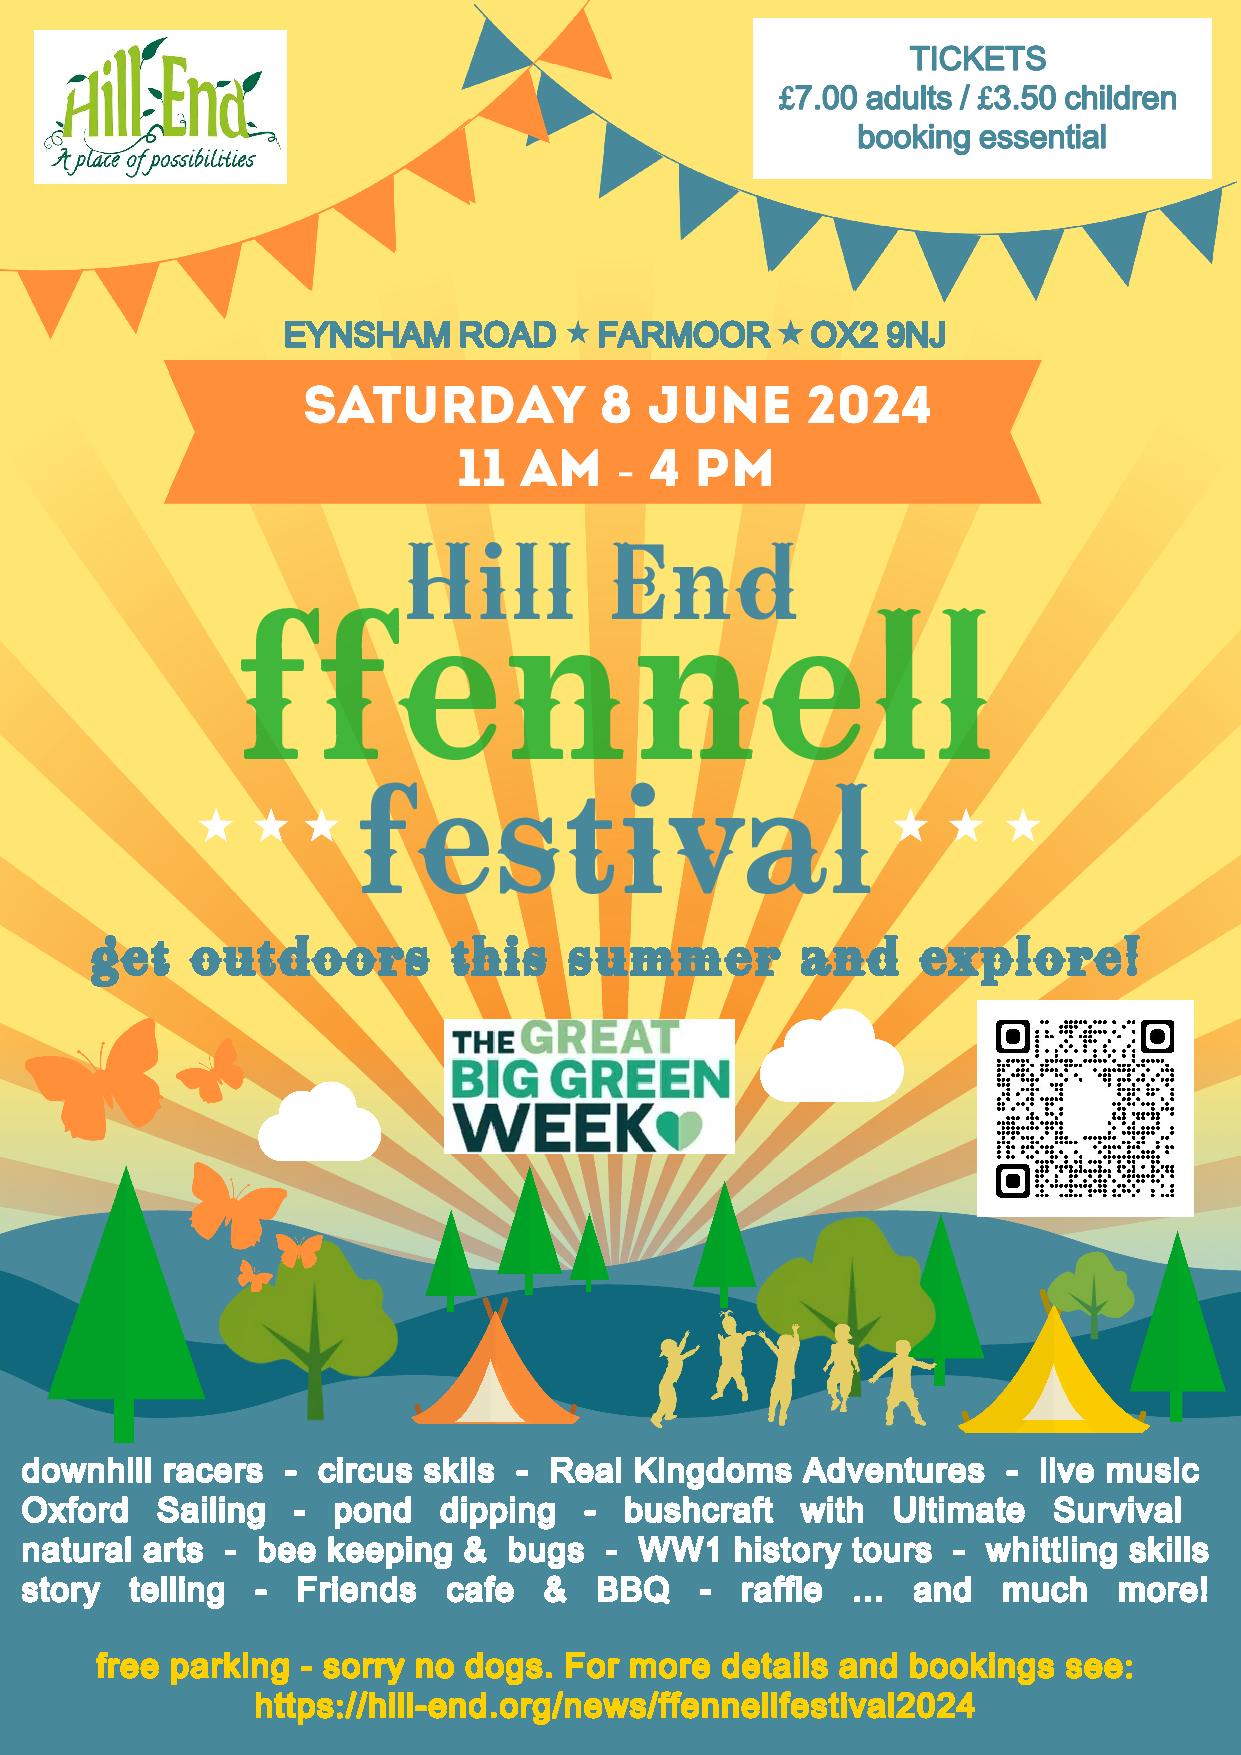 Hill End ffennell festival